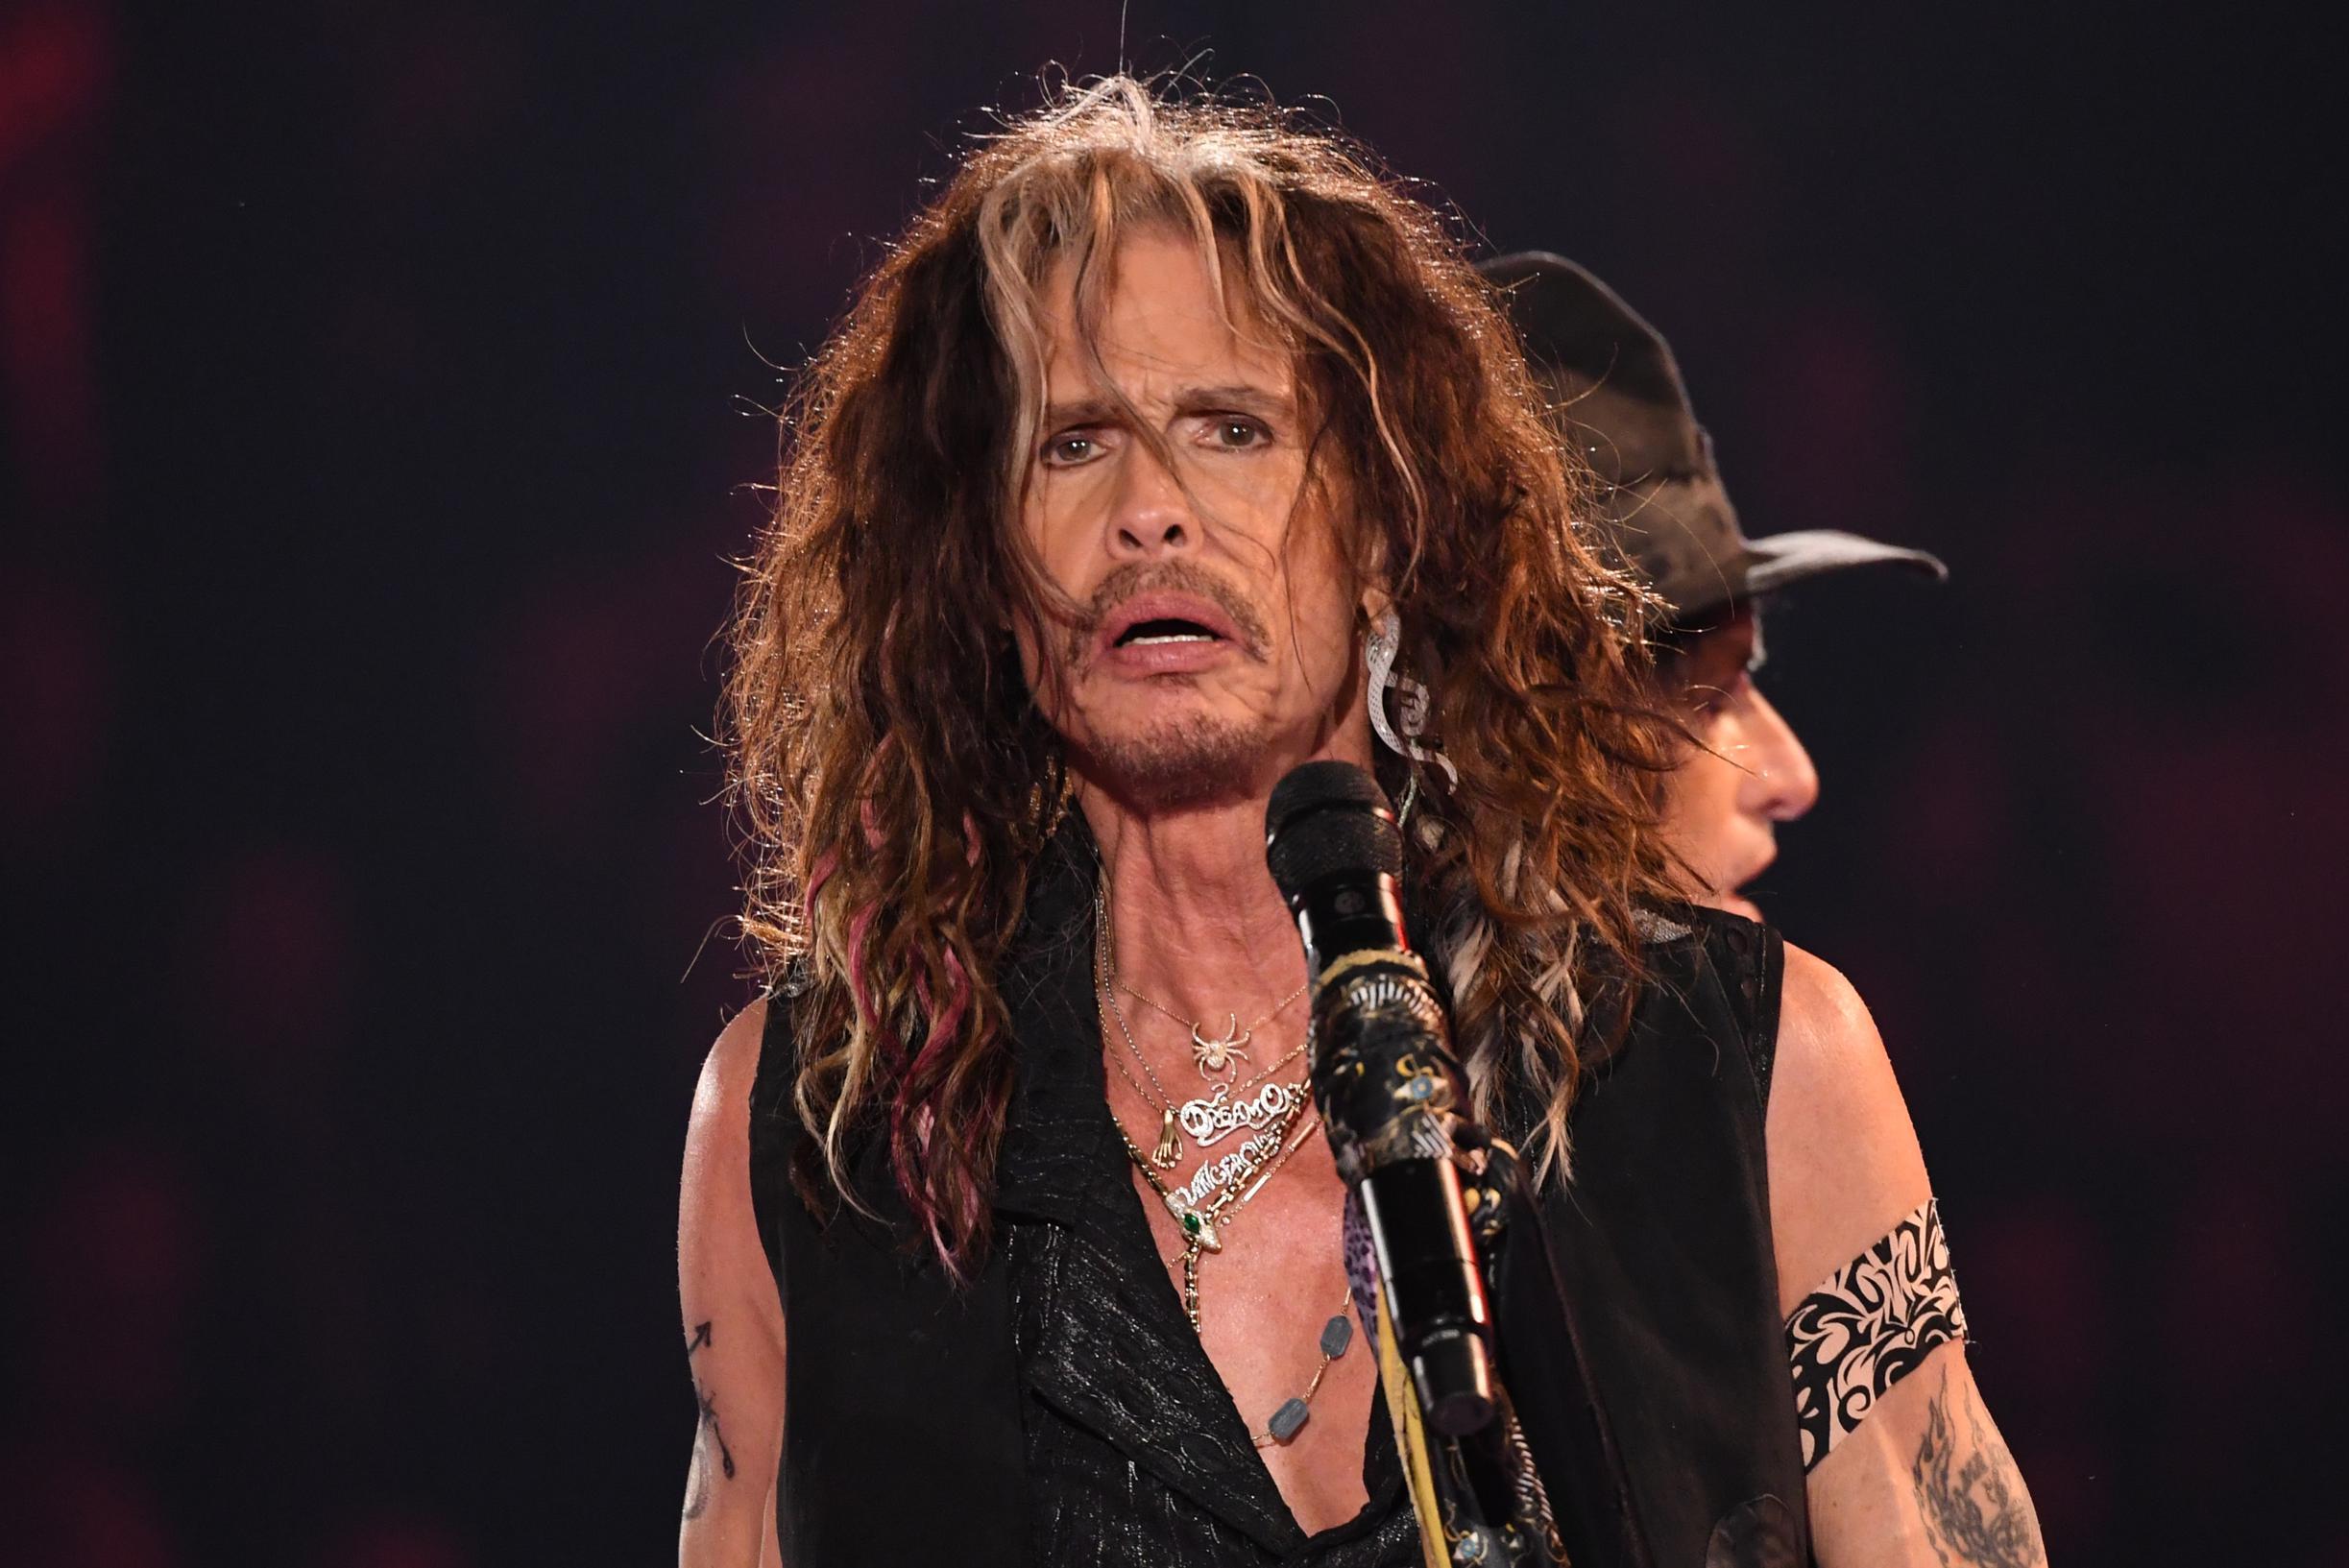 Aerosmith leader Steven Tyler has been accused of assaulting a minor in the 1970s: ‘It was my heart’s desire and my partner in crime of passion’